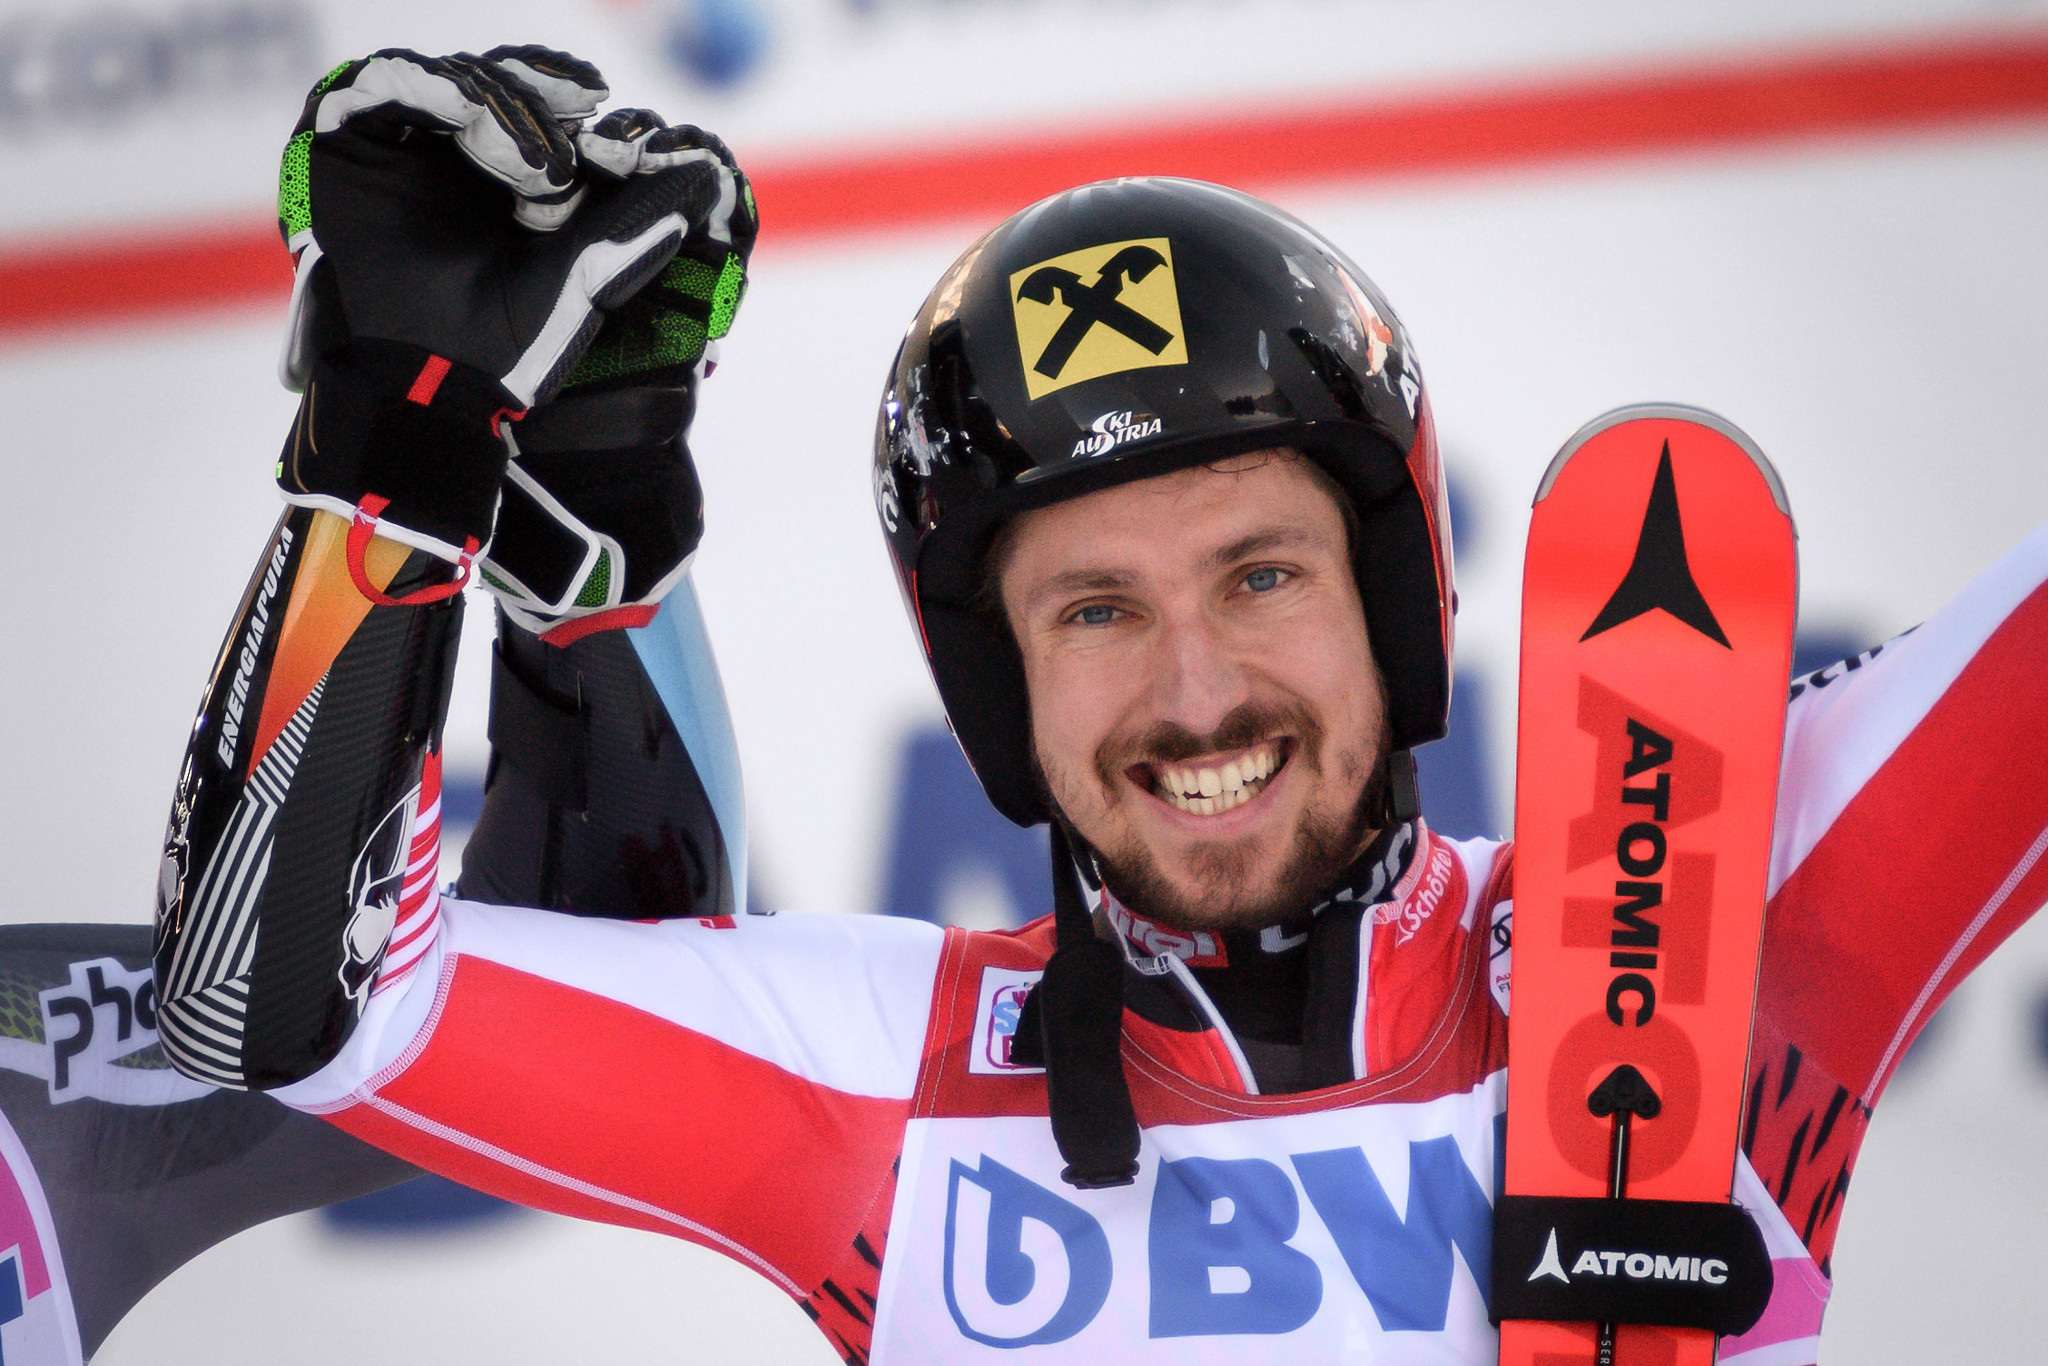 Austria's Marcel Hirscher won the men's giant slalom at the FIS Alpine Skiing World Cup in Adelboden ©Getty Images